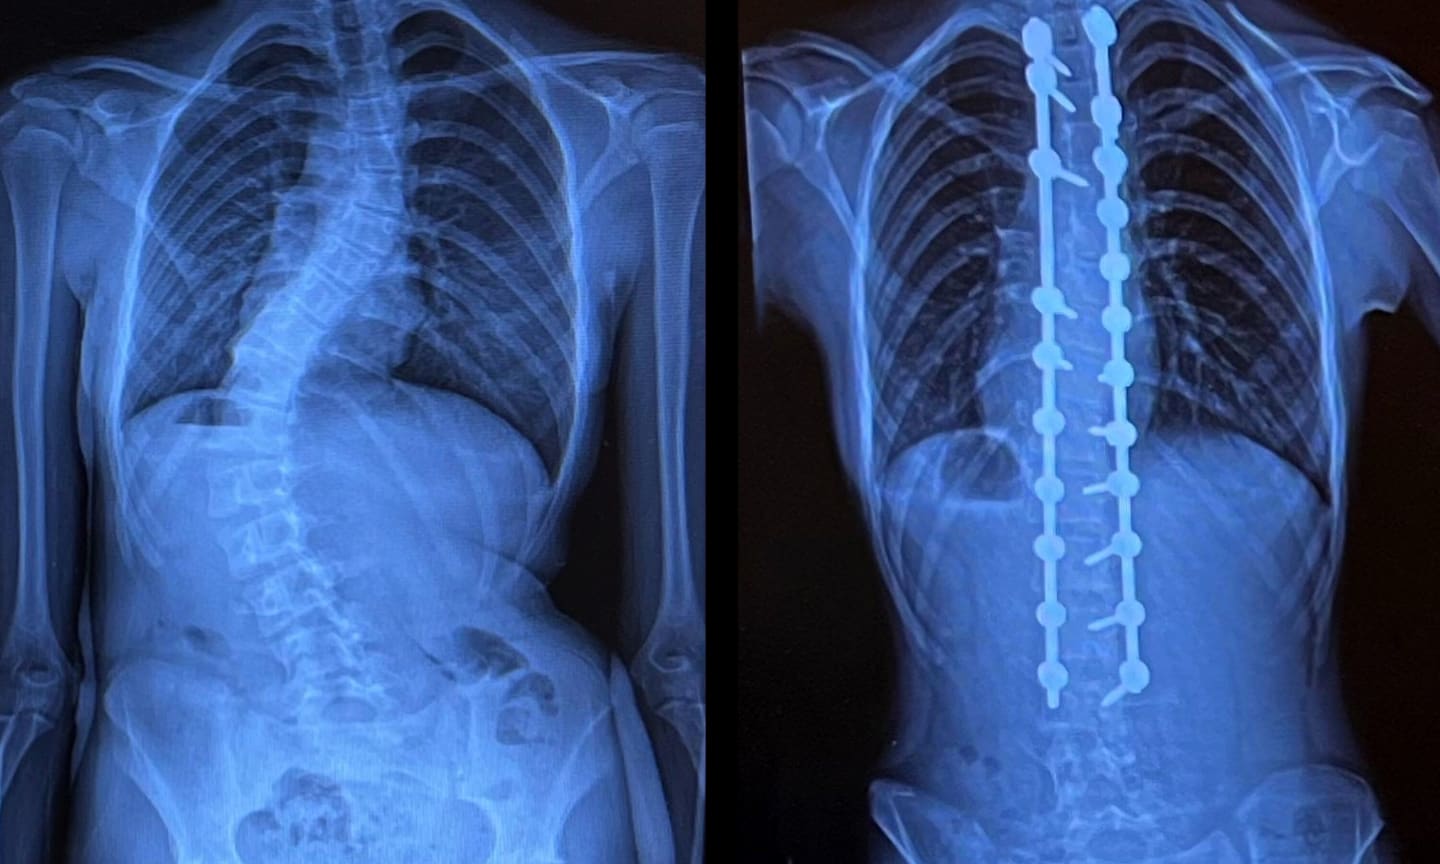 These are "before" and "after" X-rays for scoliosis patient Danielle (Dani) Olson, who had spinal fusion surgery. 